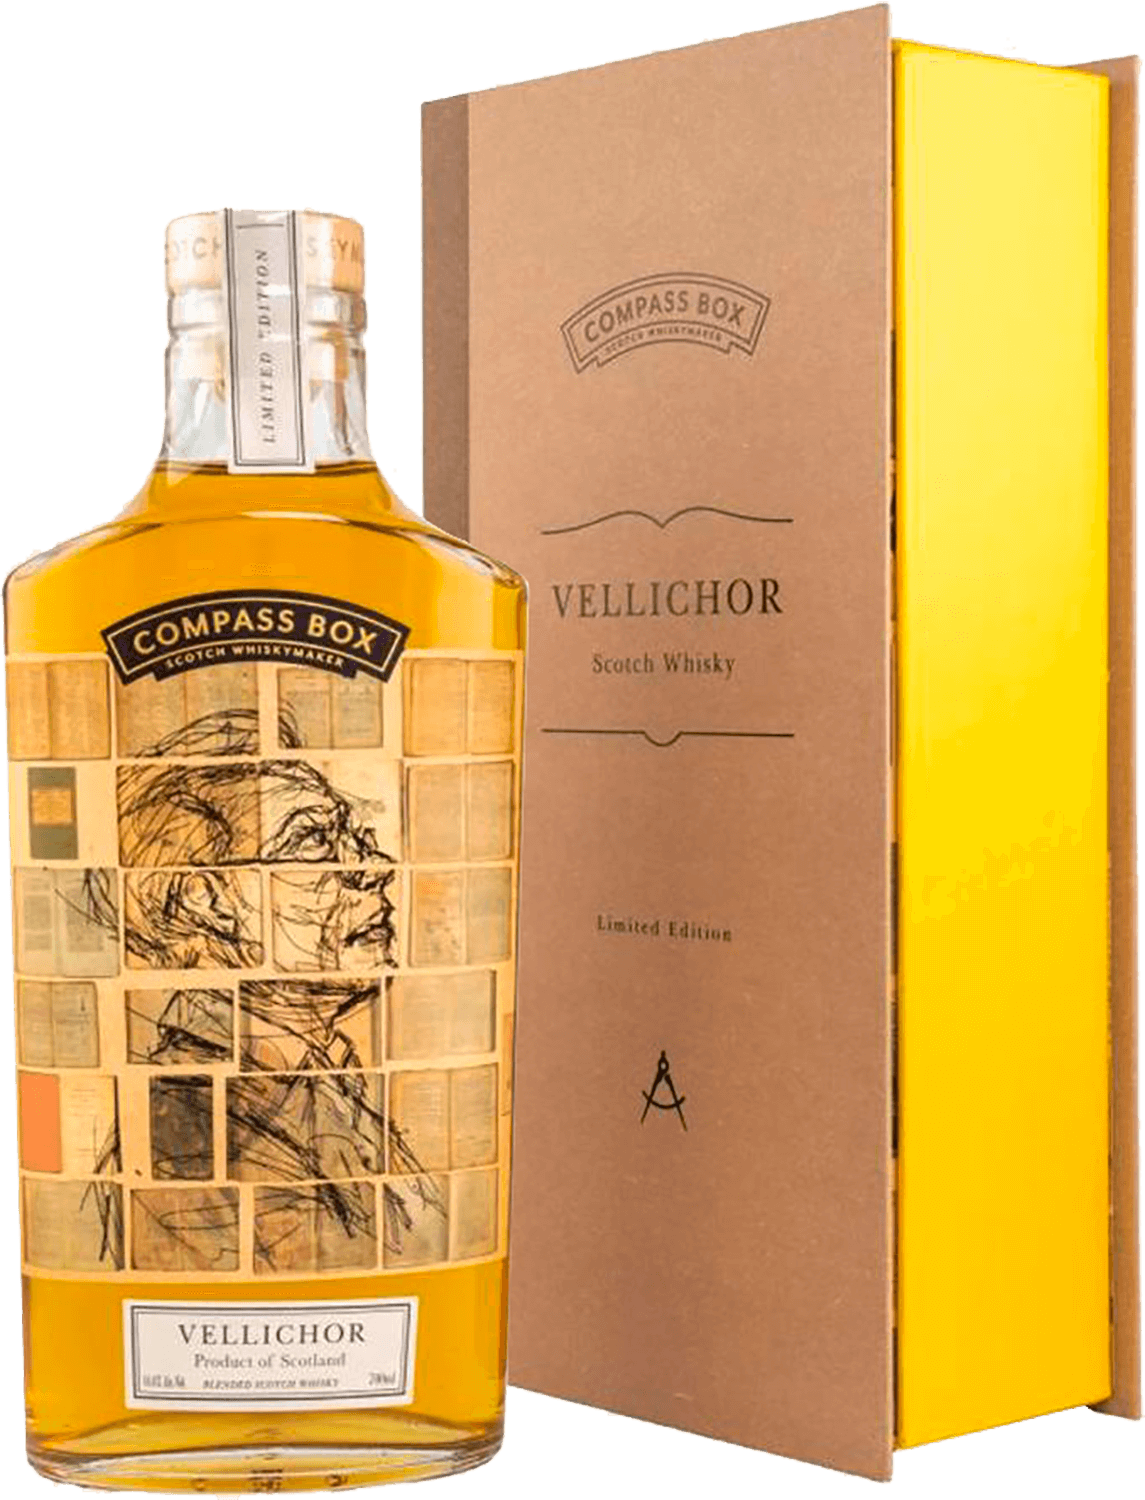 Compass Box Vellichor Blended Scotch Whisky (gift box) clan macgregor blended scotch whisky gift box with a glass